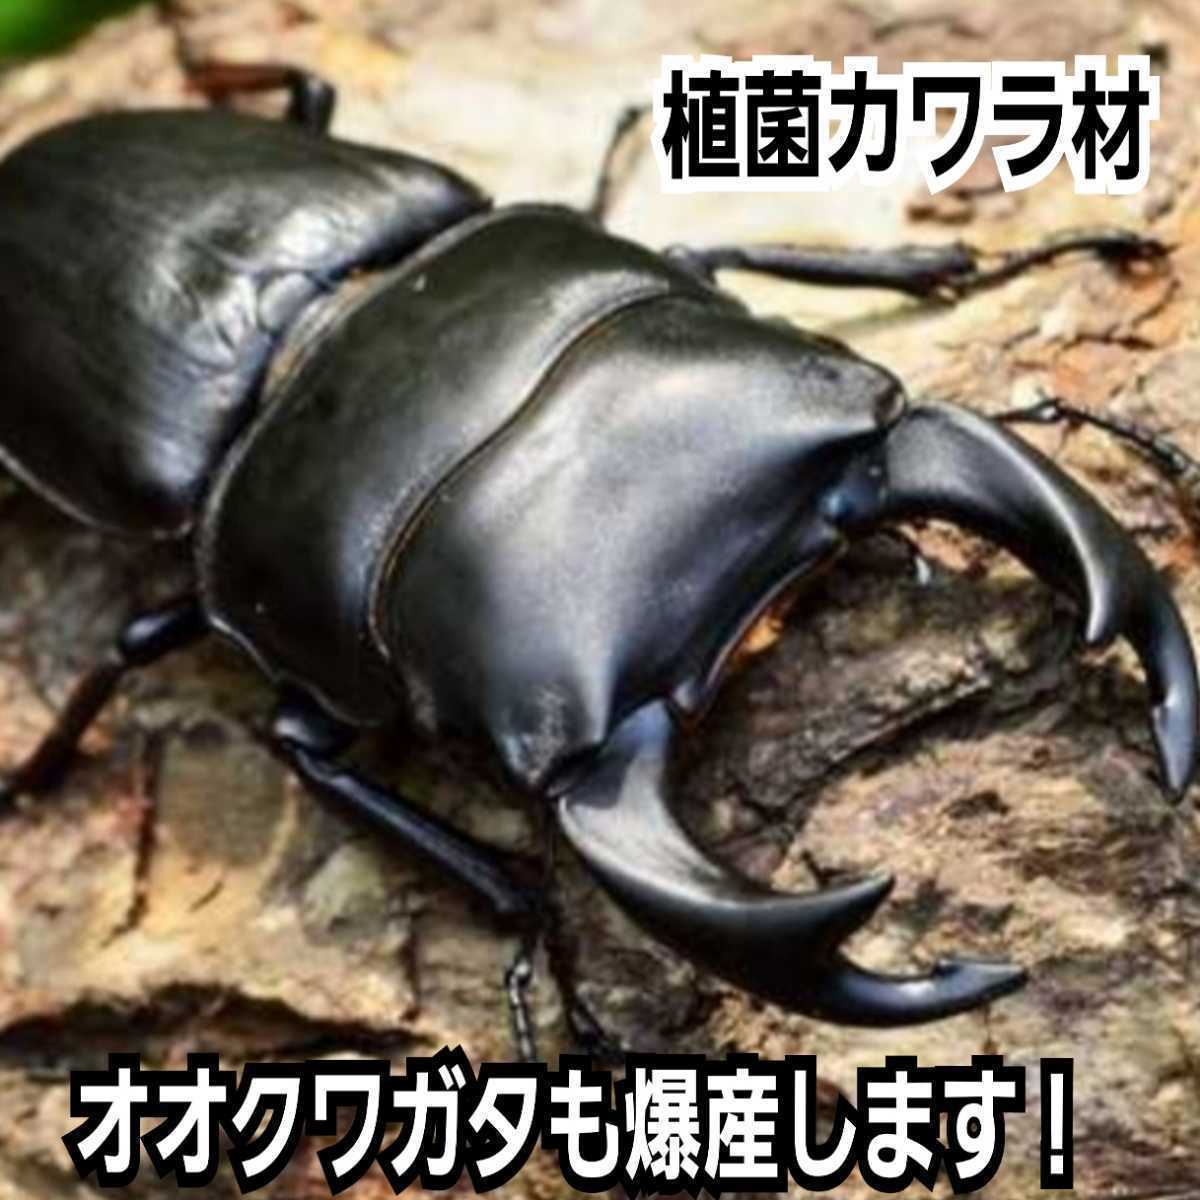  extra-large size .. leather la material ta Land us* regulation light *ougononi. eminent .. done . therefore mold not! stag beetle production egg - this is strongest production egg tree 